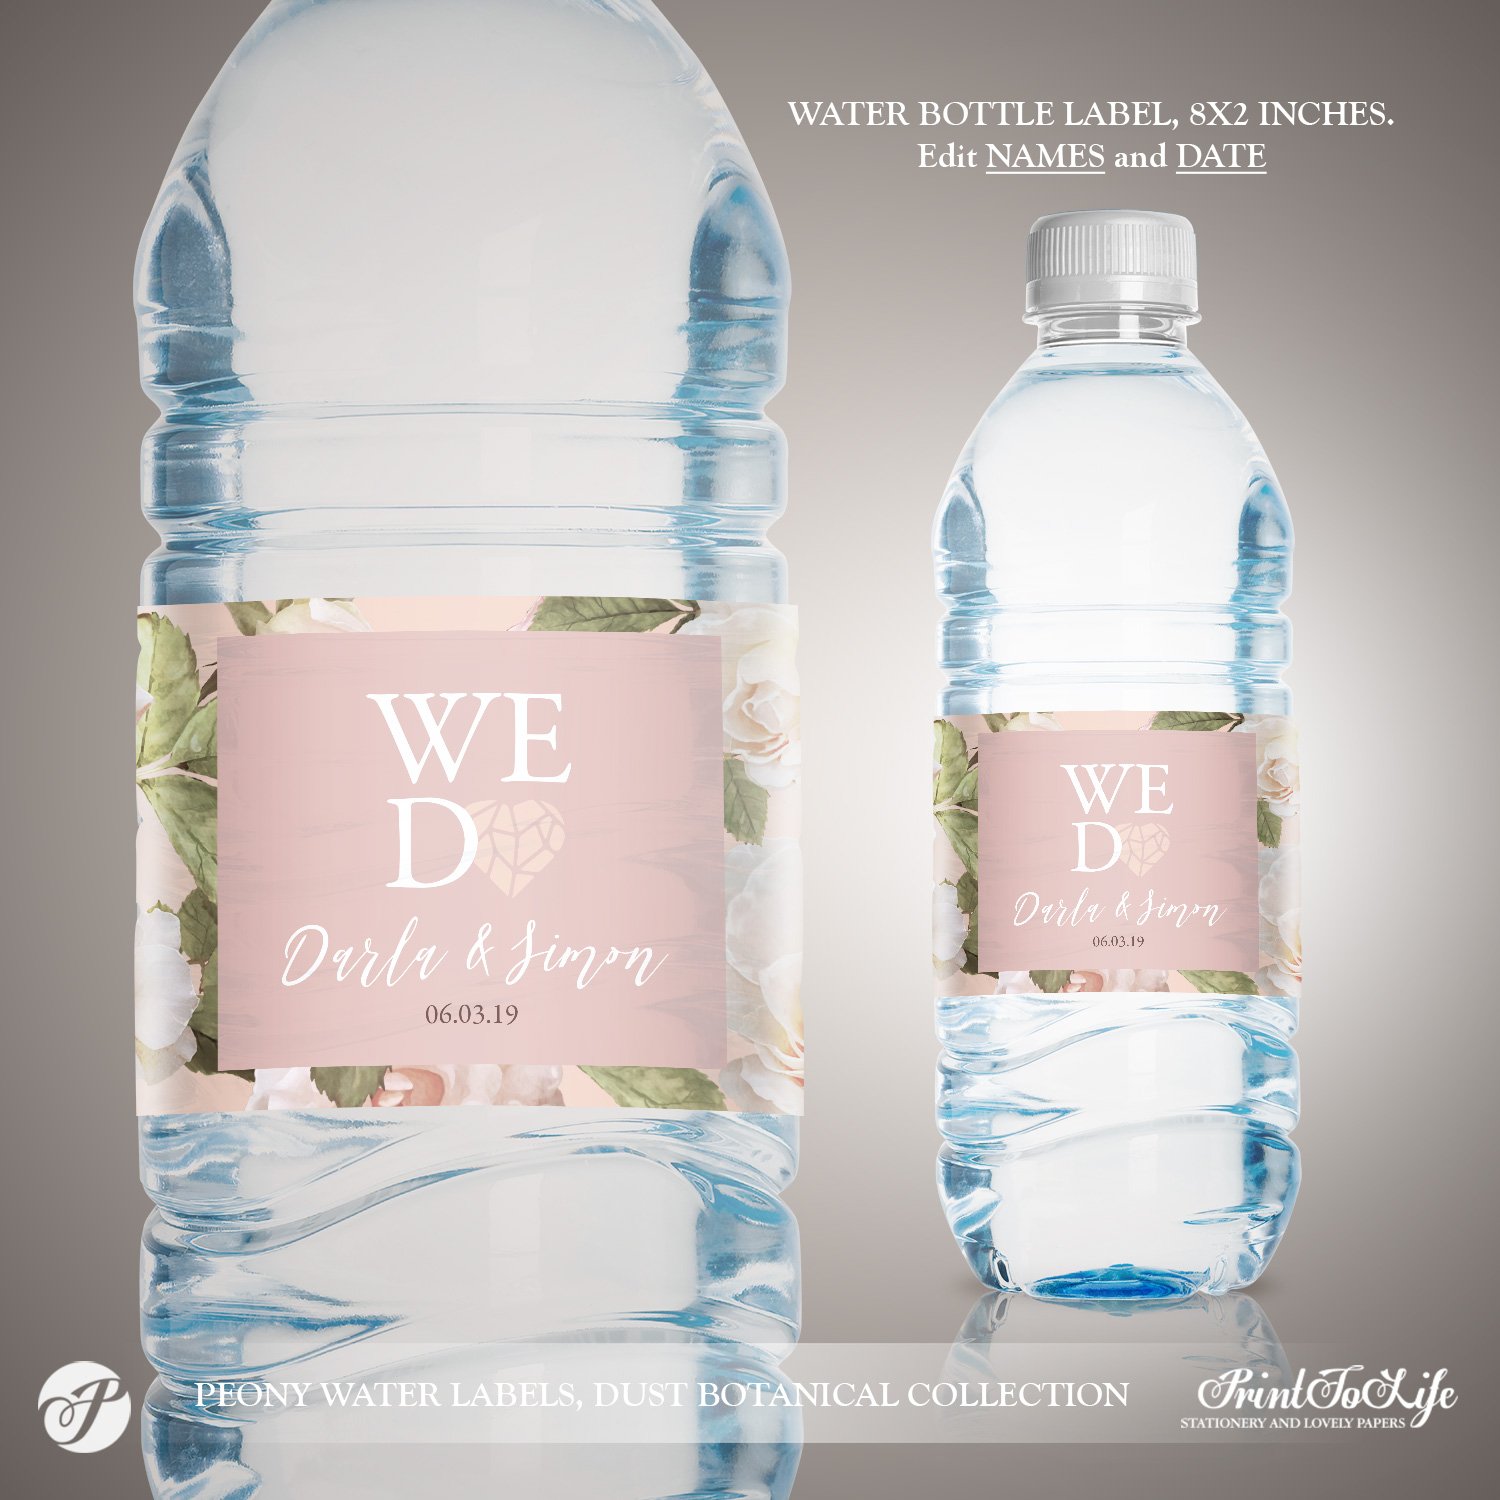 Peony Water Bottle Label Template by Printolife